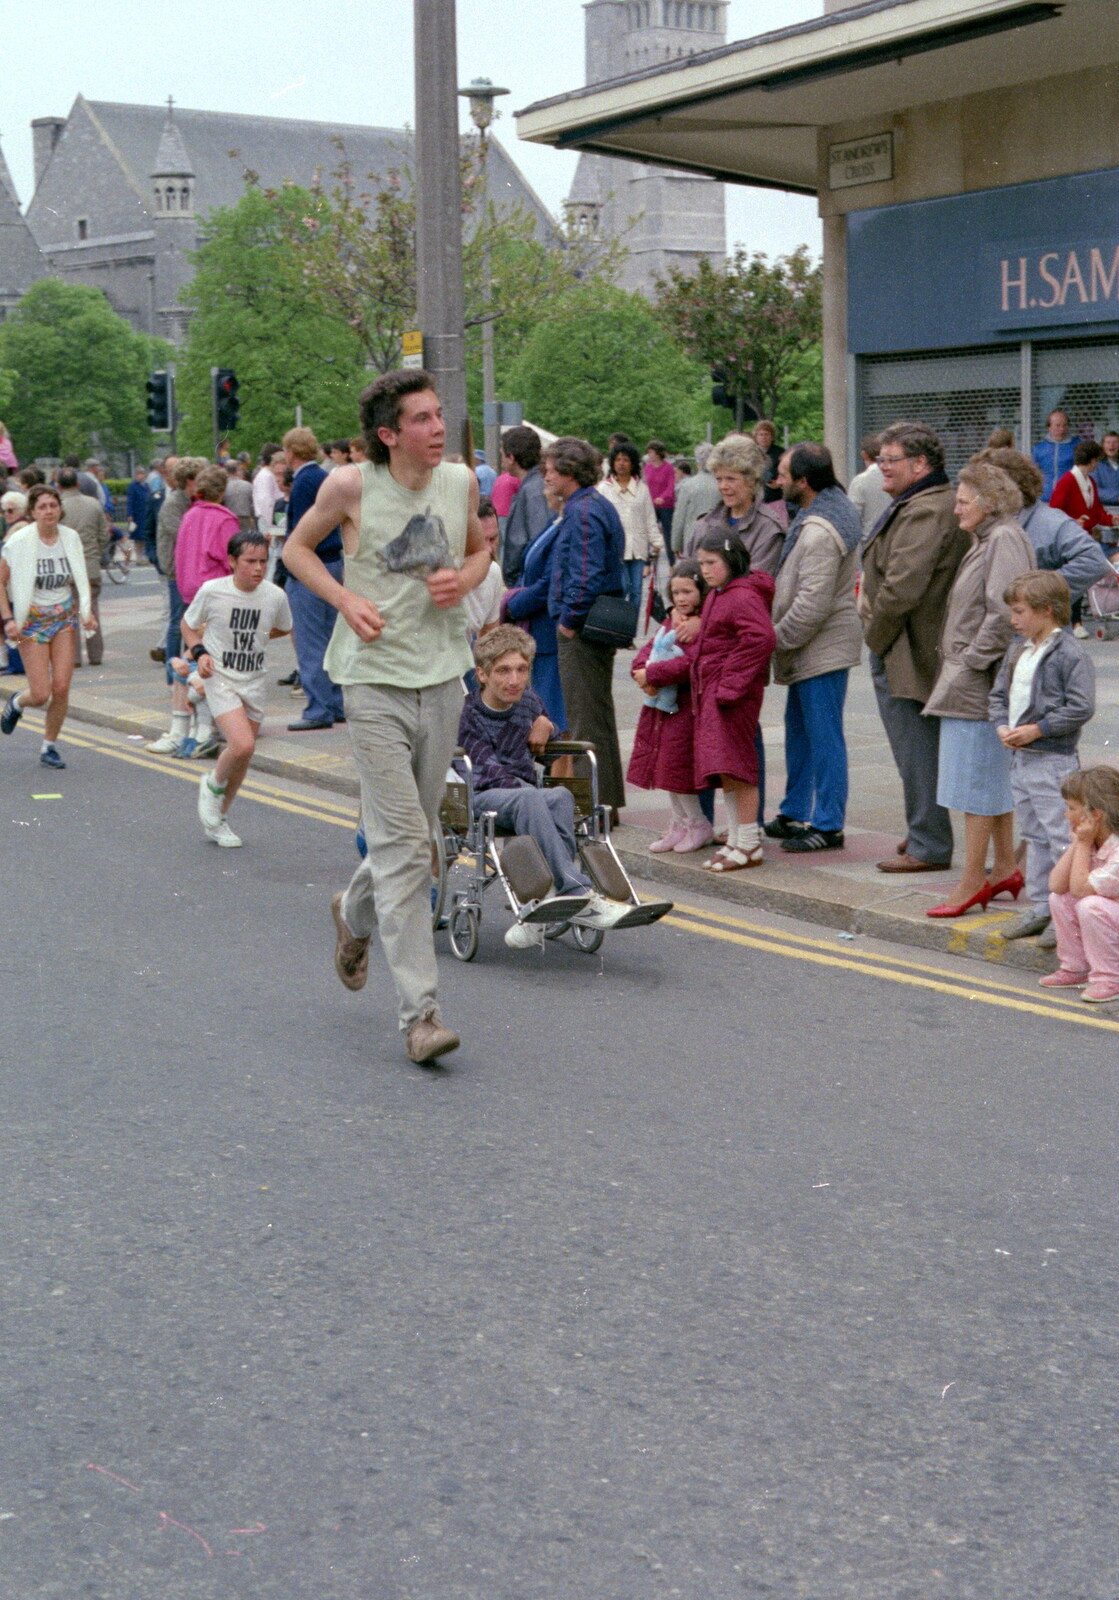 More runners and wheels from Uni: Sport Aid - Run The World, Plymouth, Devon - 25th May 1986